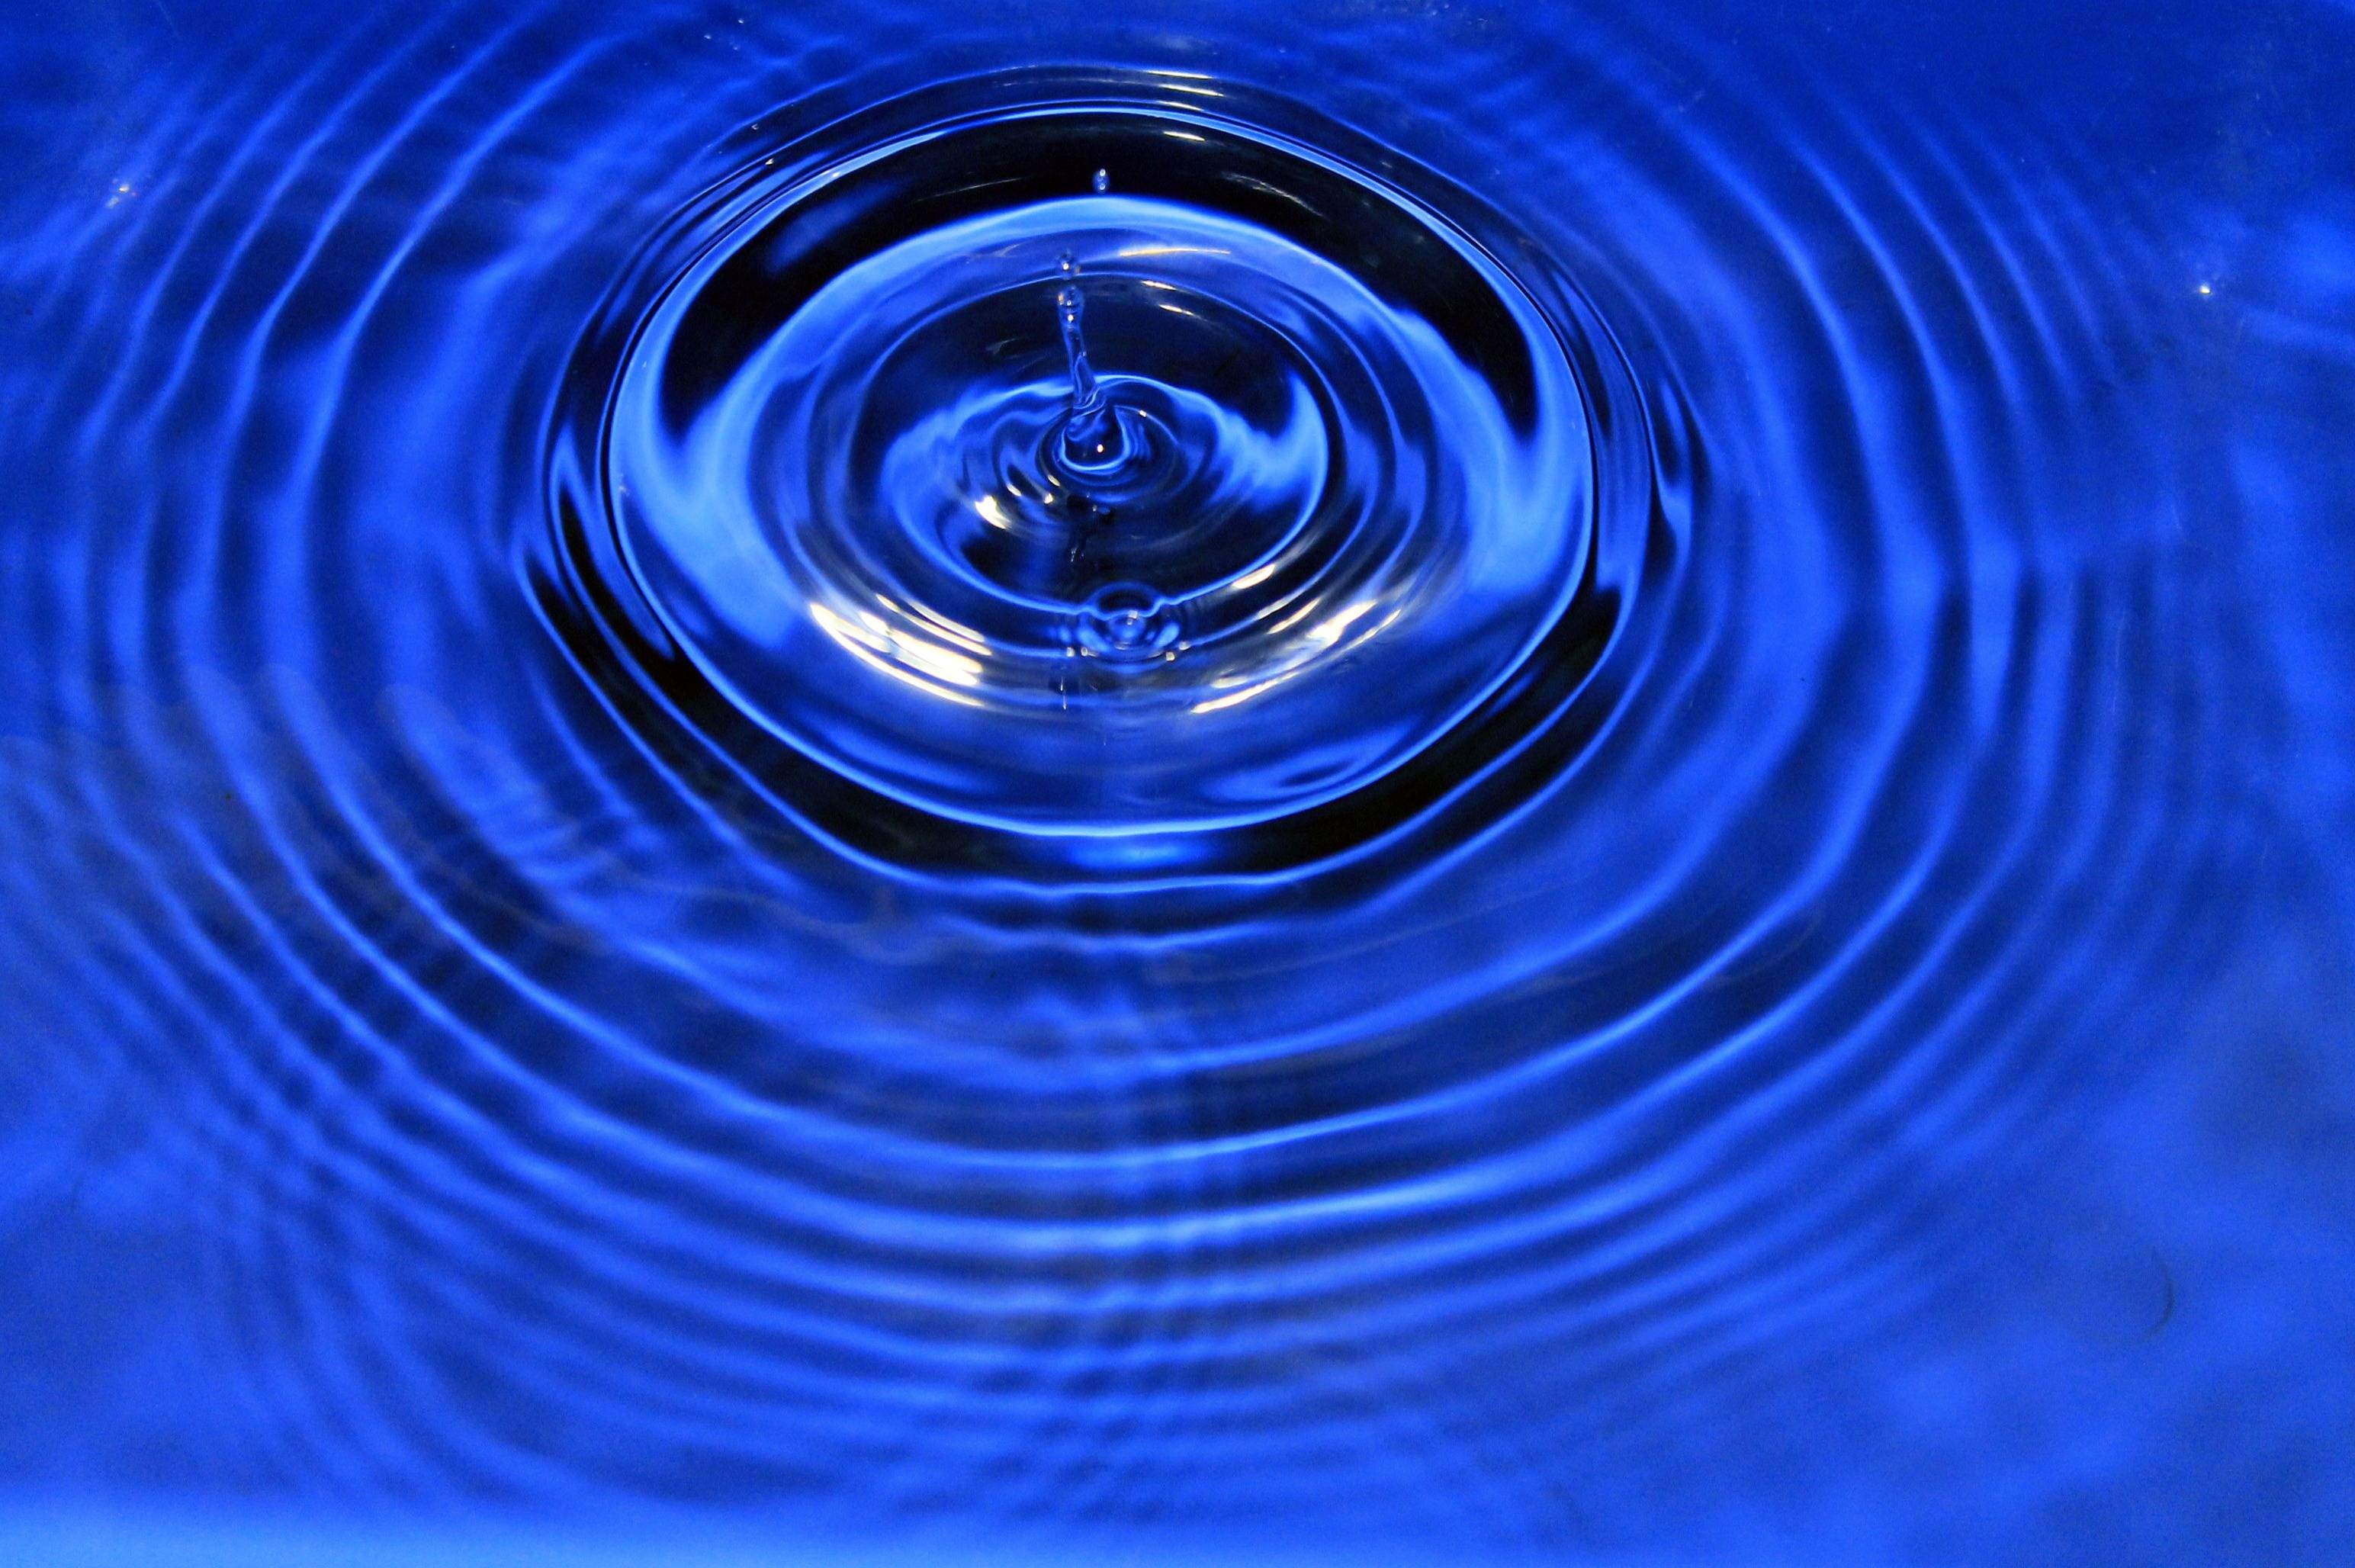 Save Original Image * Non Live Wallpaper Image - Waves On Water Science , HD Wallpaper & Backgrounds